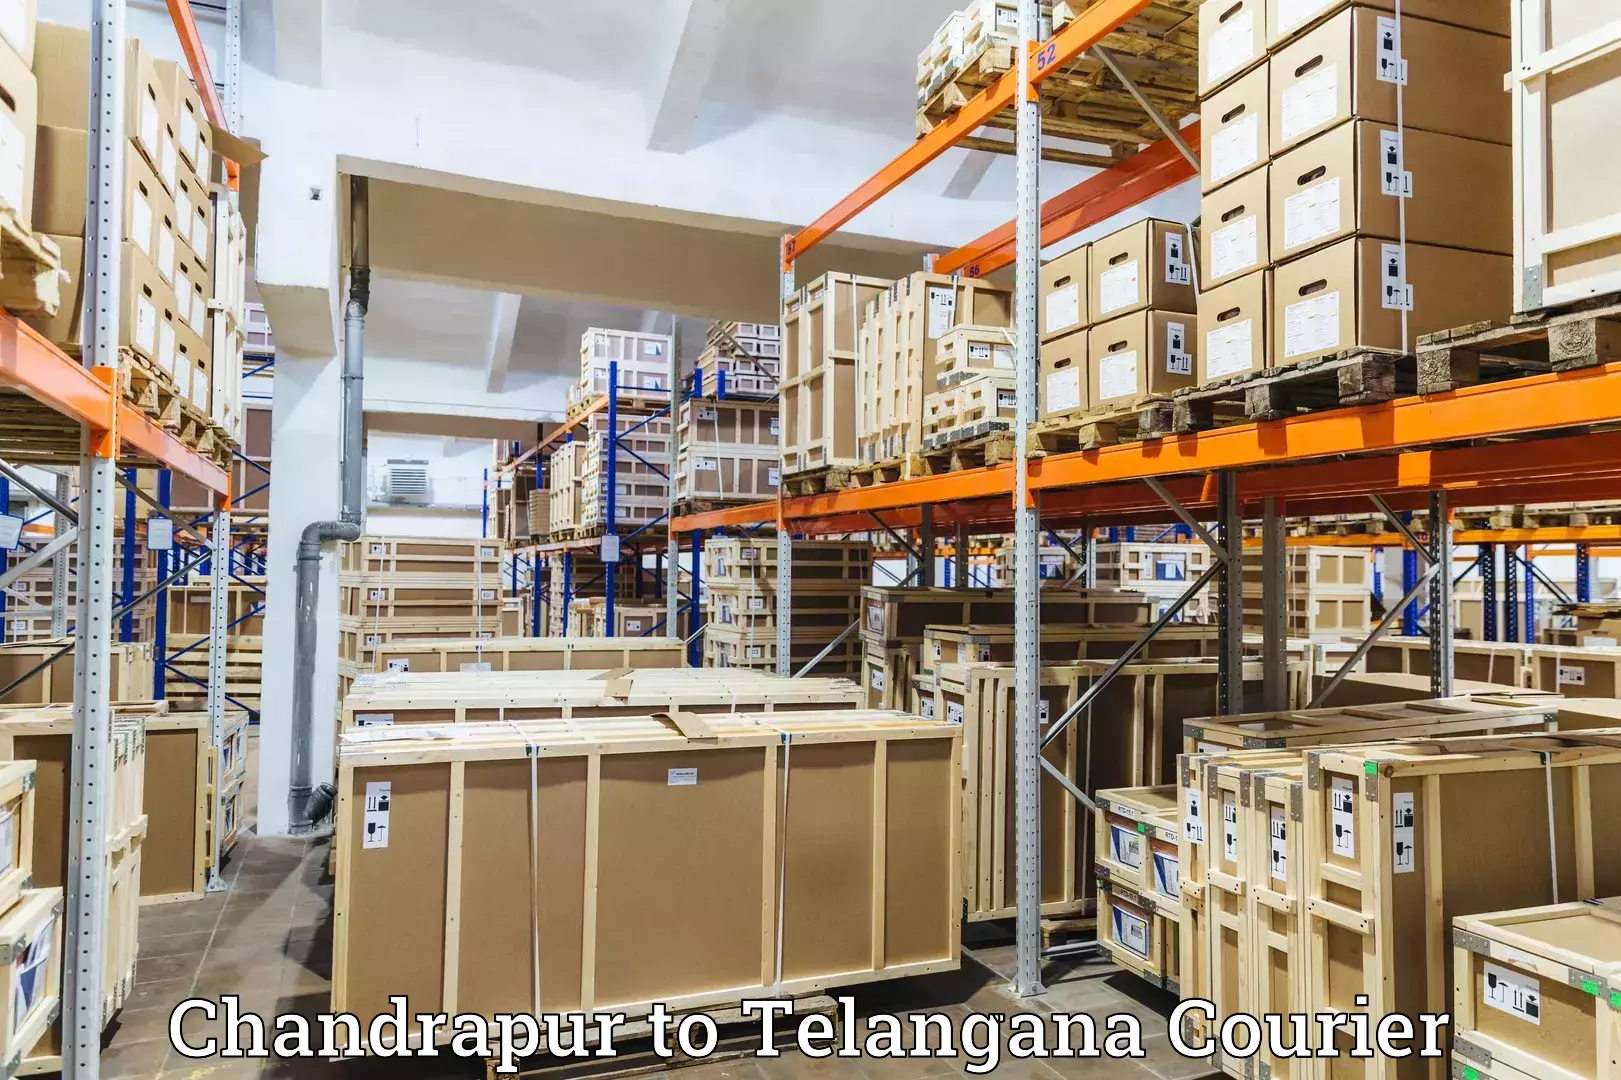 Online package tracking Chandrapur to Osmania University Hyderabad